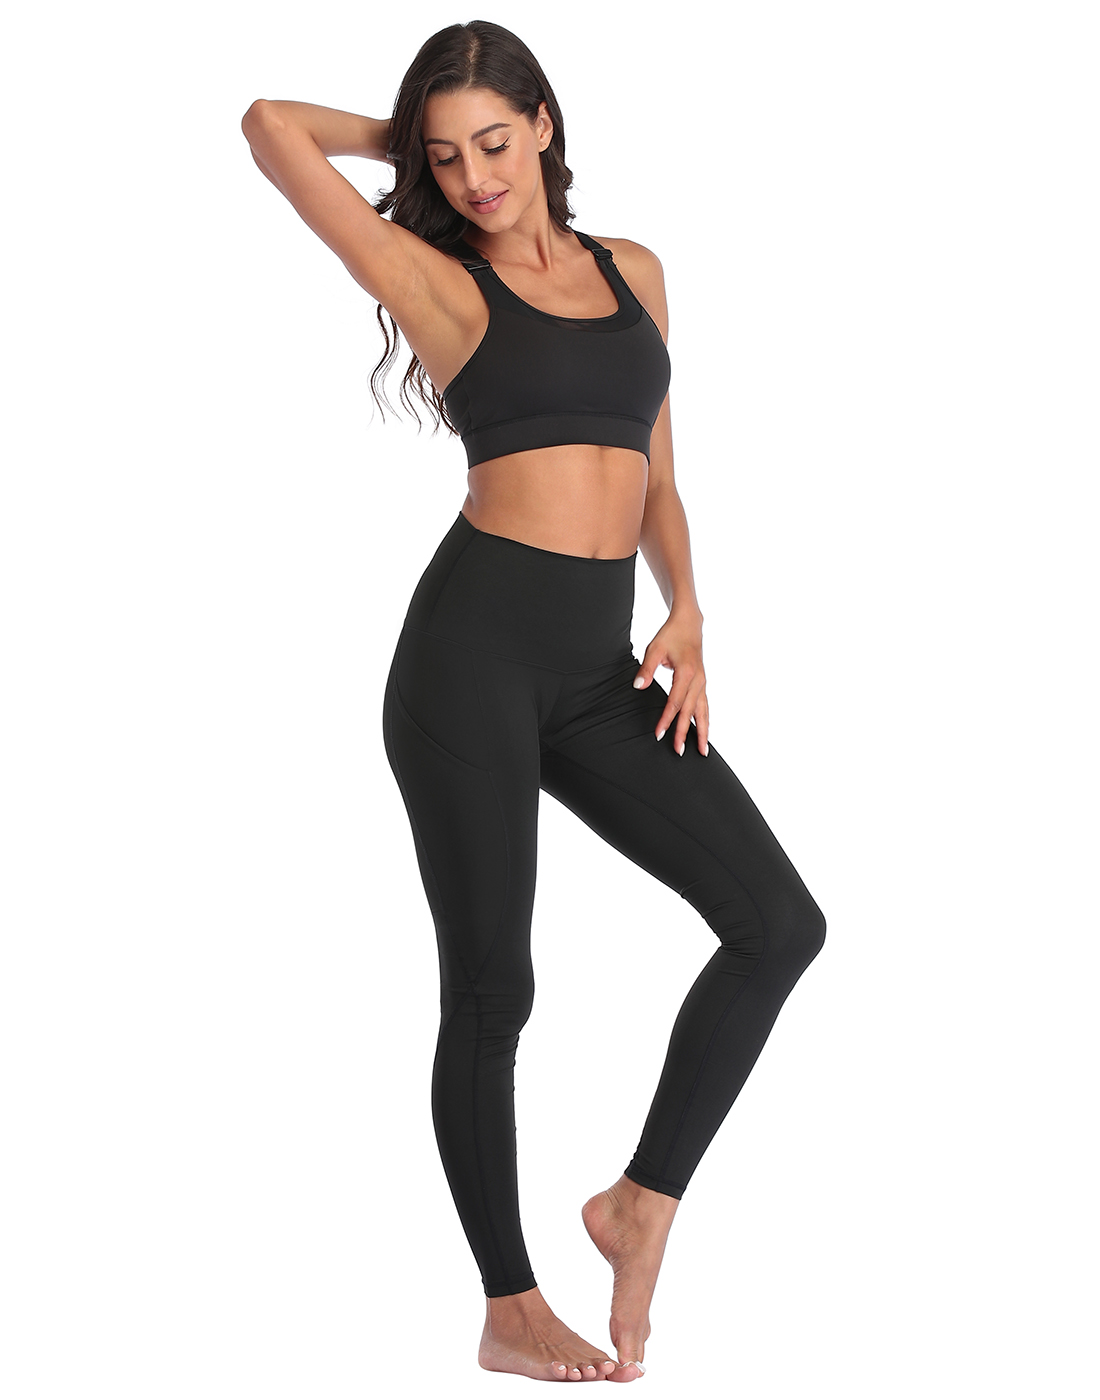 HDE Yoga Pants with Pockets for Women High Waisted Tummy Control Leggings (Black, L) - image 3 of 6